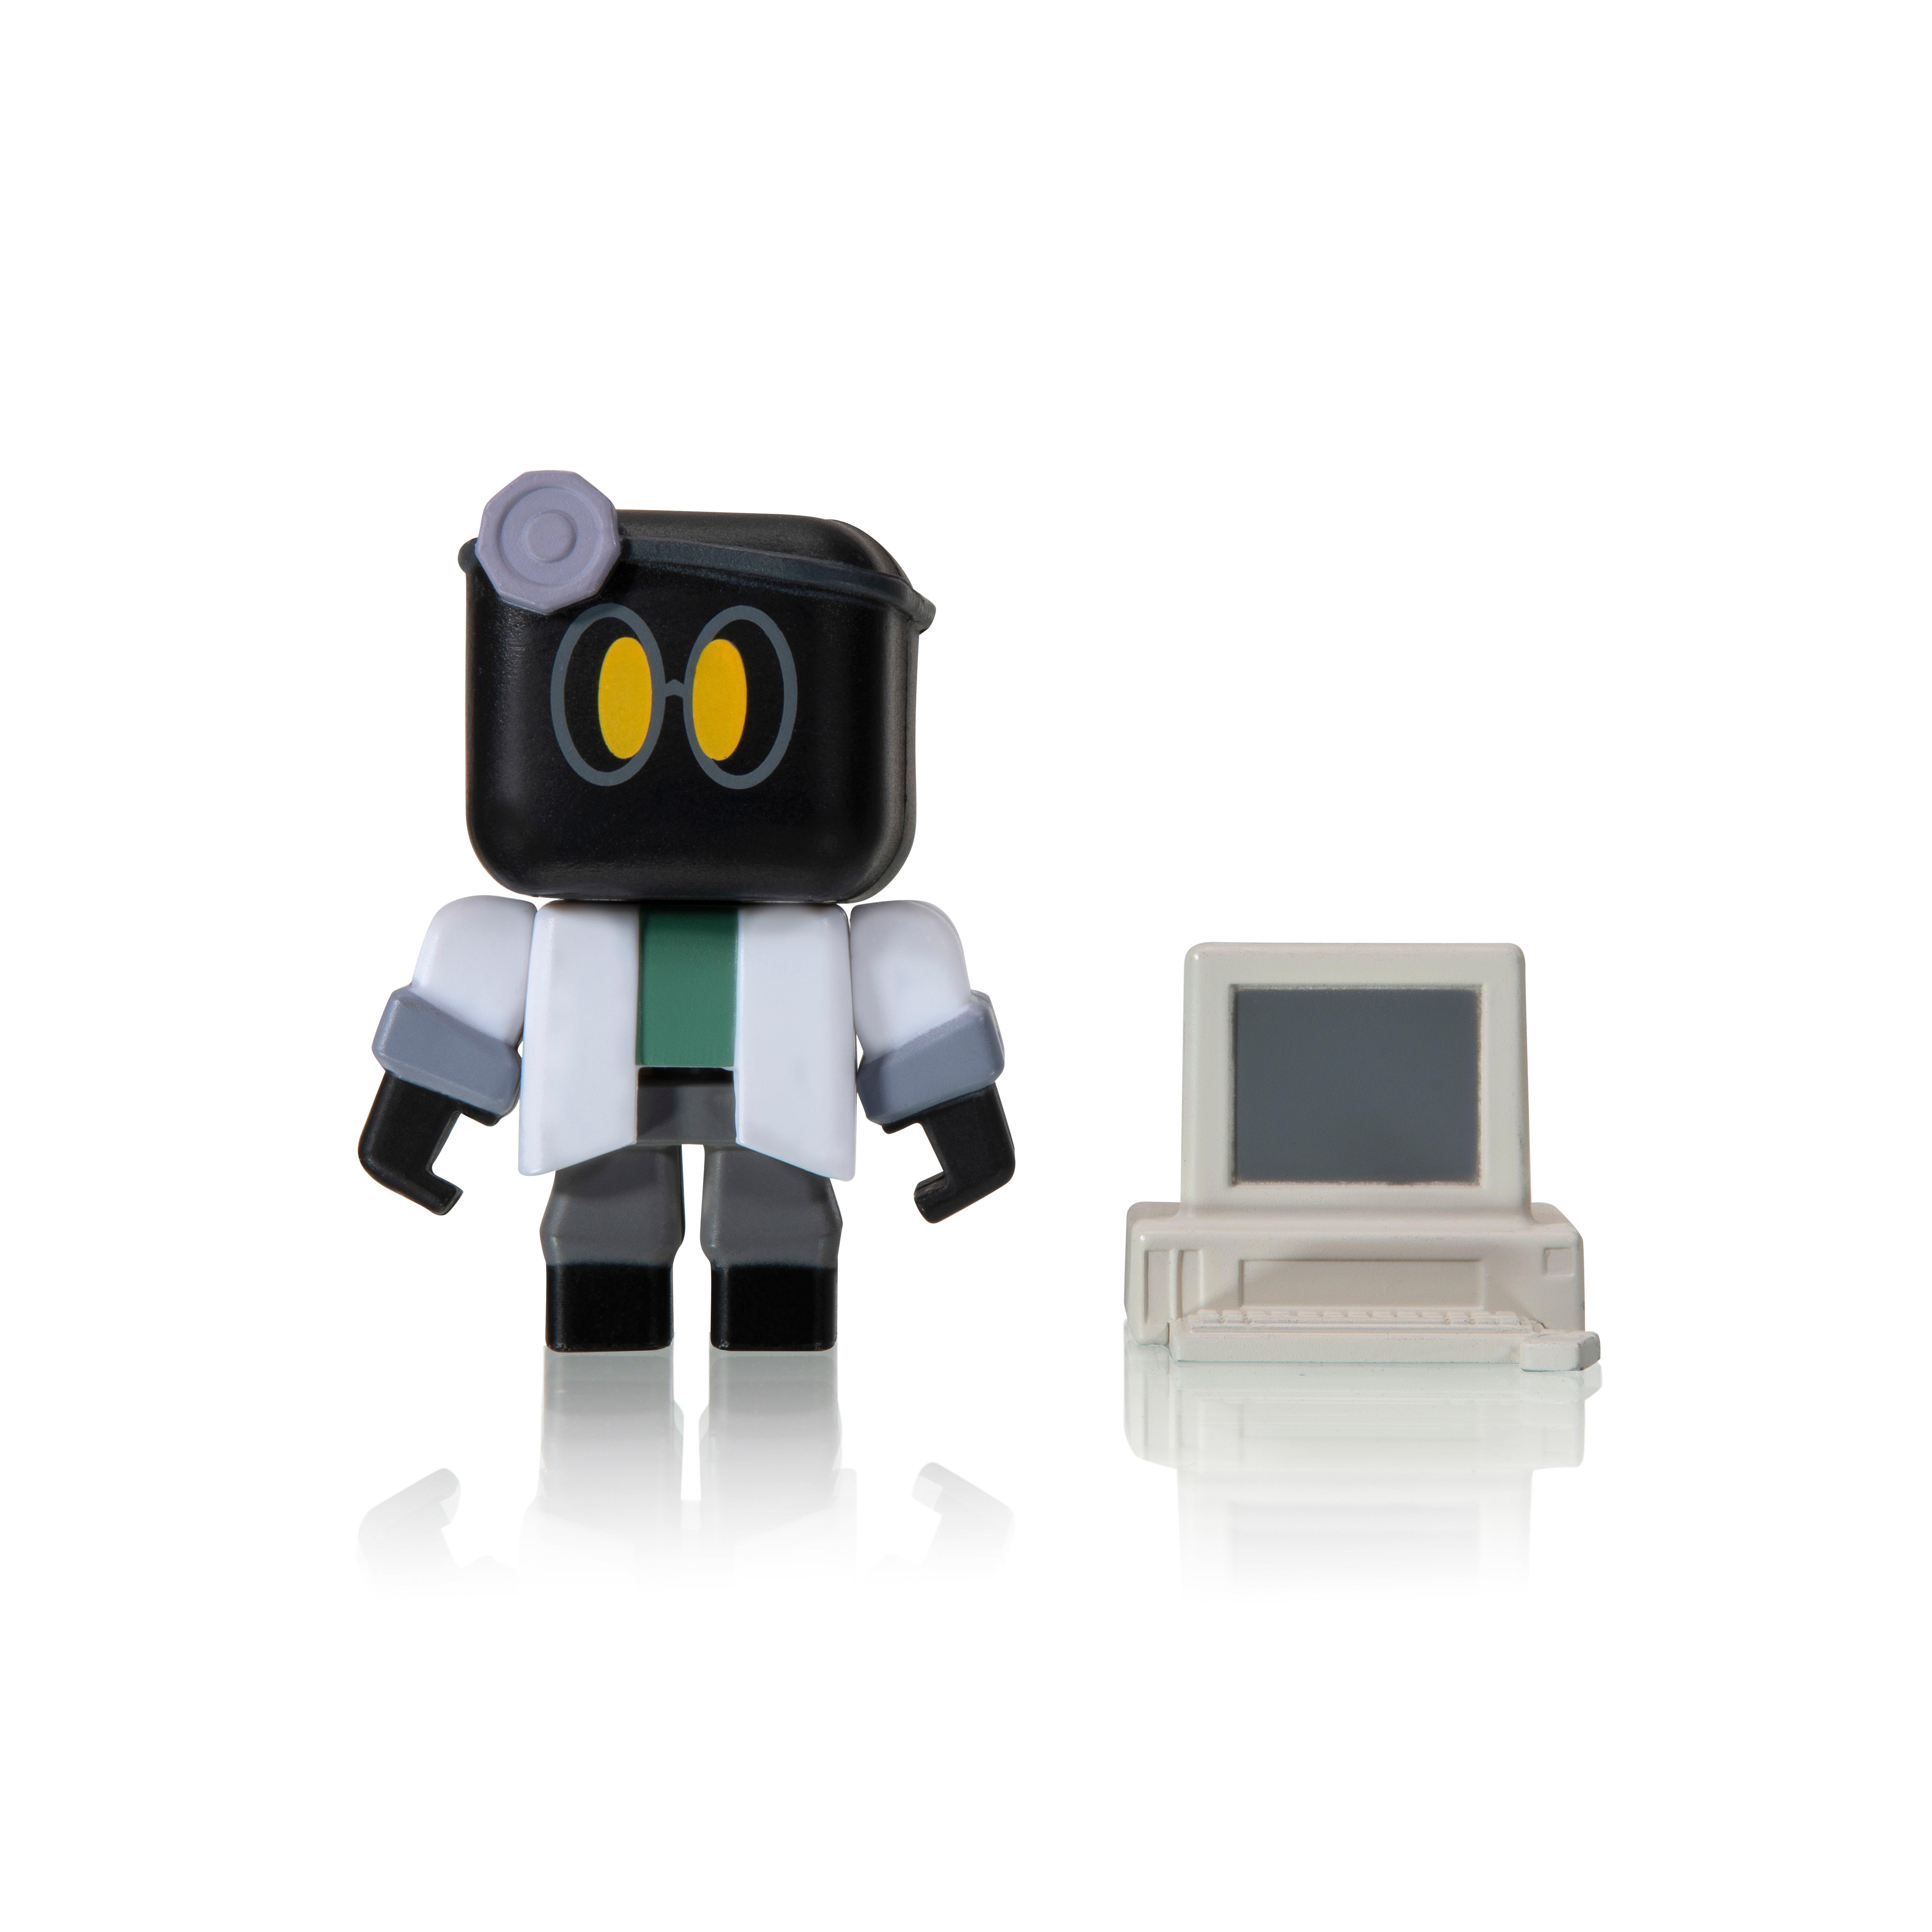 Roblox Action Collection Series 8 Mystery Figure Includes 1 Figure And Exclusive Virtual Item Gamestop - roblox toys robot